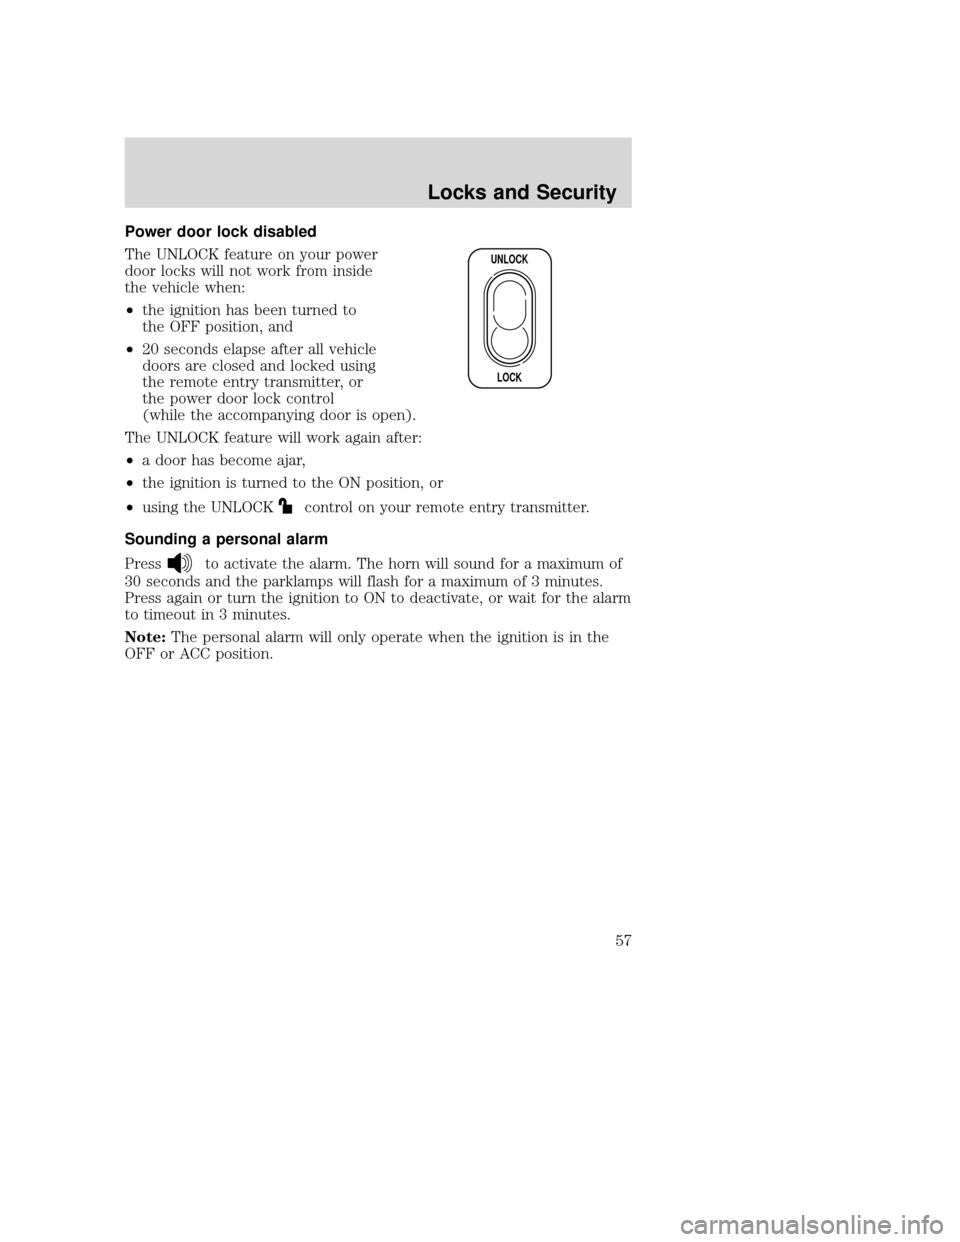 MAZDA MODEL B-SERIES 2004  Owners Manual (in English) Power door lock disabled
The UNLOCK feature on your power
door locks will not work from inside
the vehicle when:
•the ignition has been turned to
the OFF position, and
• 20 seconds elapse after al